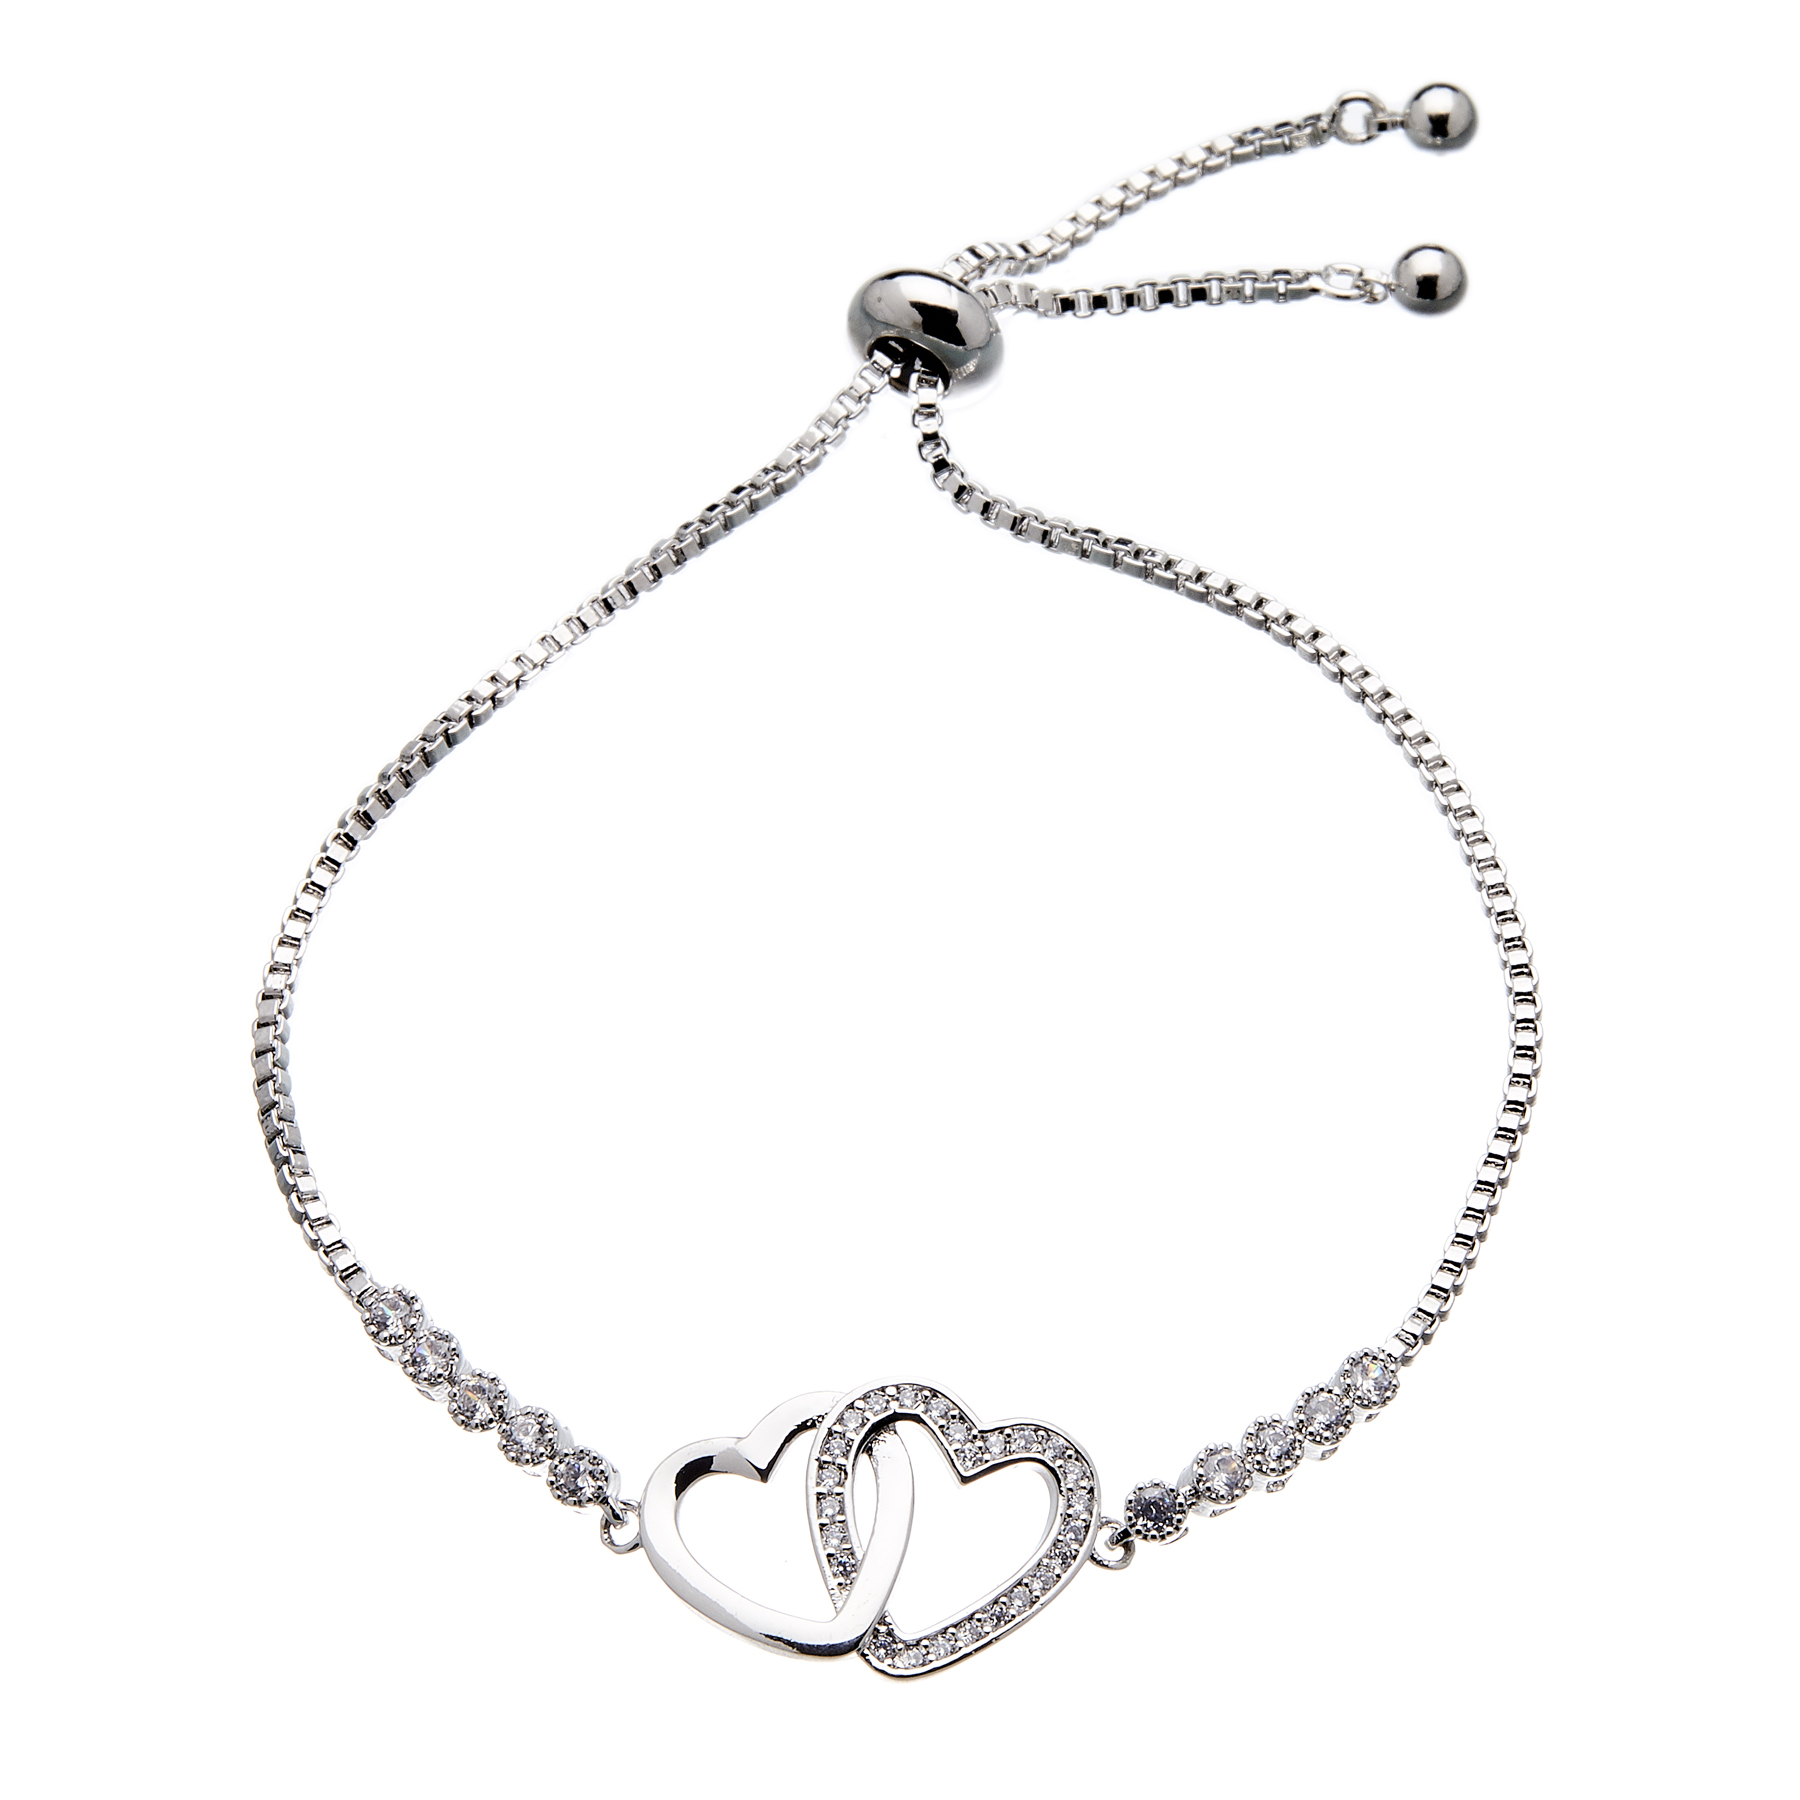 Love friendship Bracelet in silver with double linked hearts and crystals - Neola